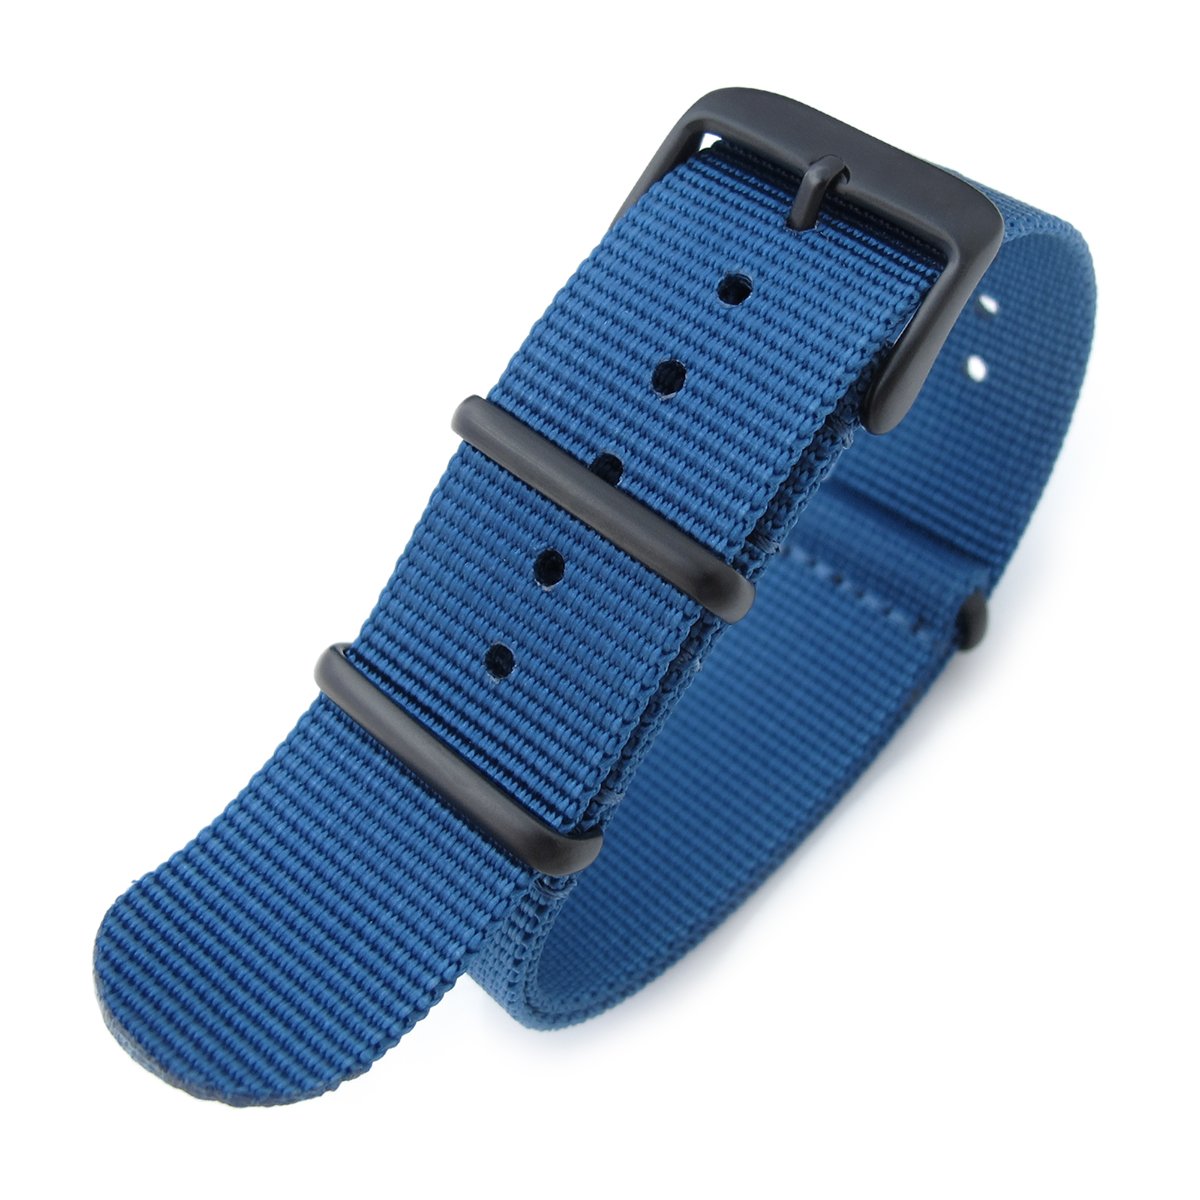 NATO 20mm G10 Military Watch Band Nylon Strap Blue PVD Black 260mm Strapcode Watch Bands